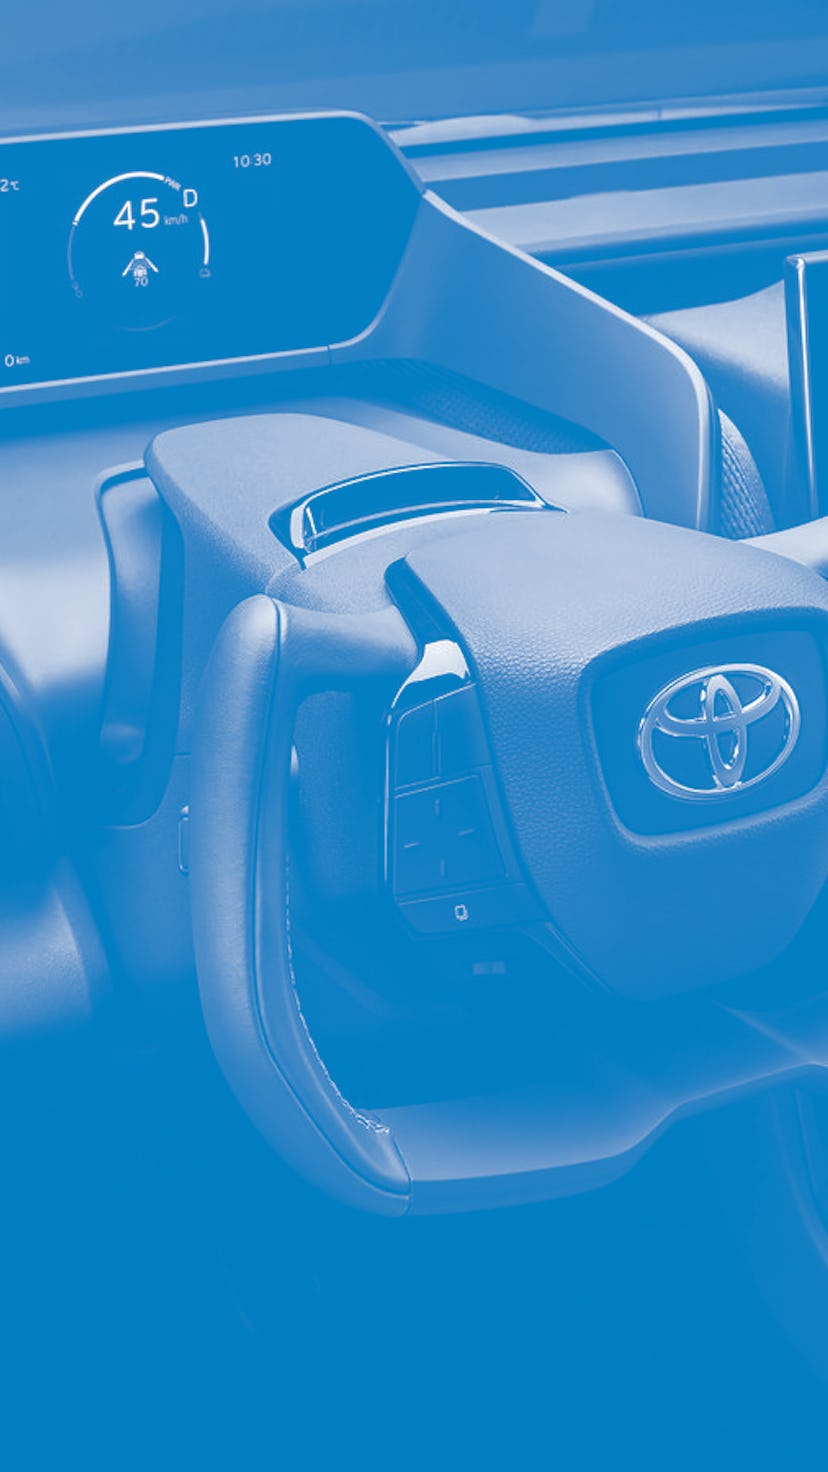 Toyota's BZ4X electric SUV with yoke steering option. EV. Evs. electric vehicles